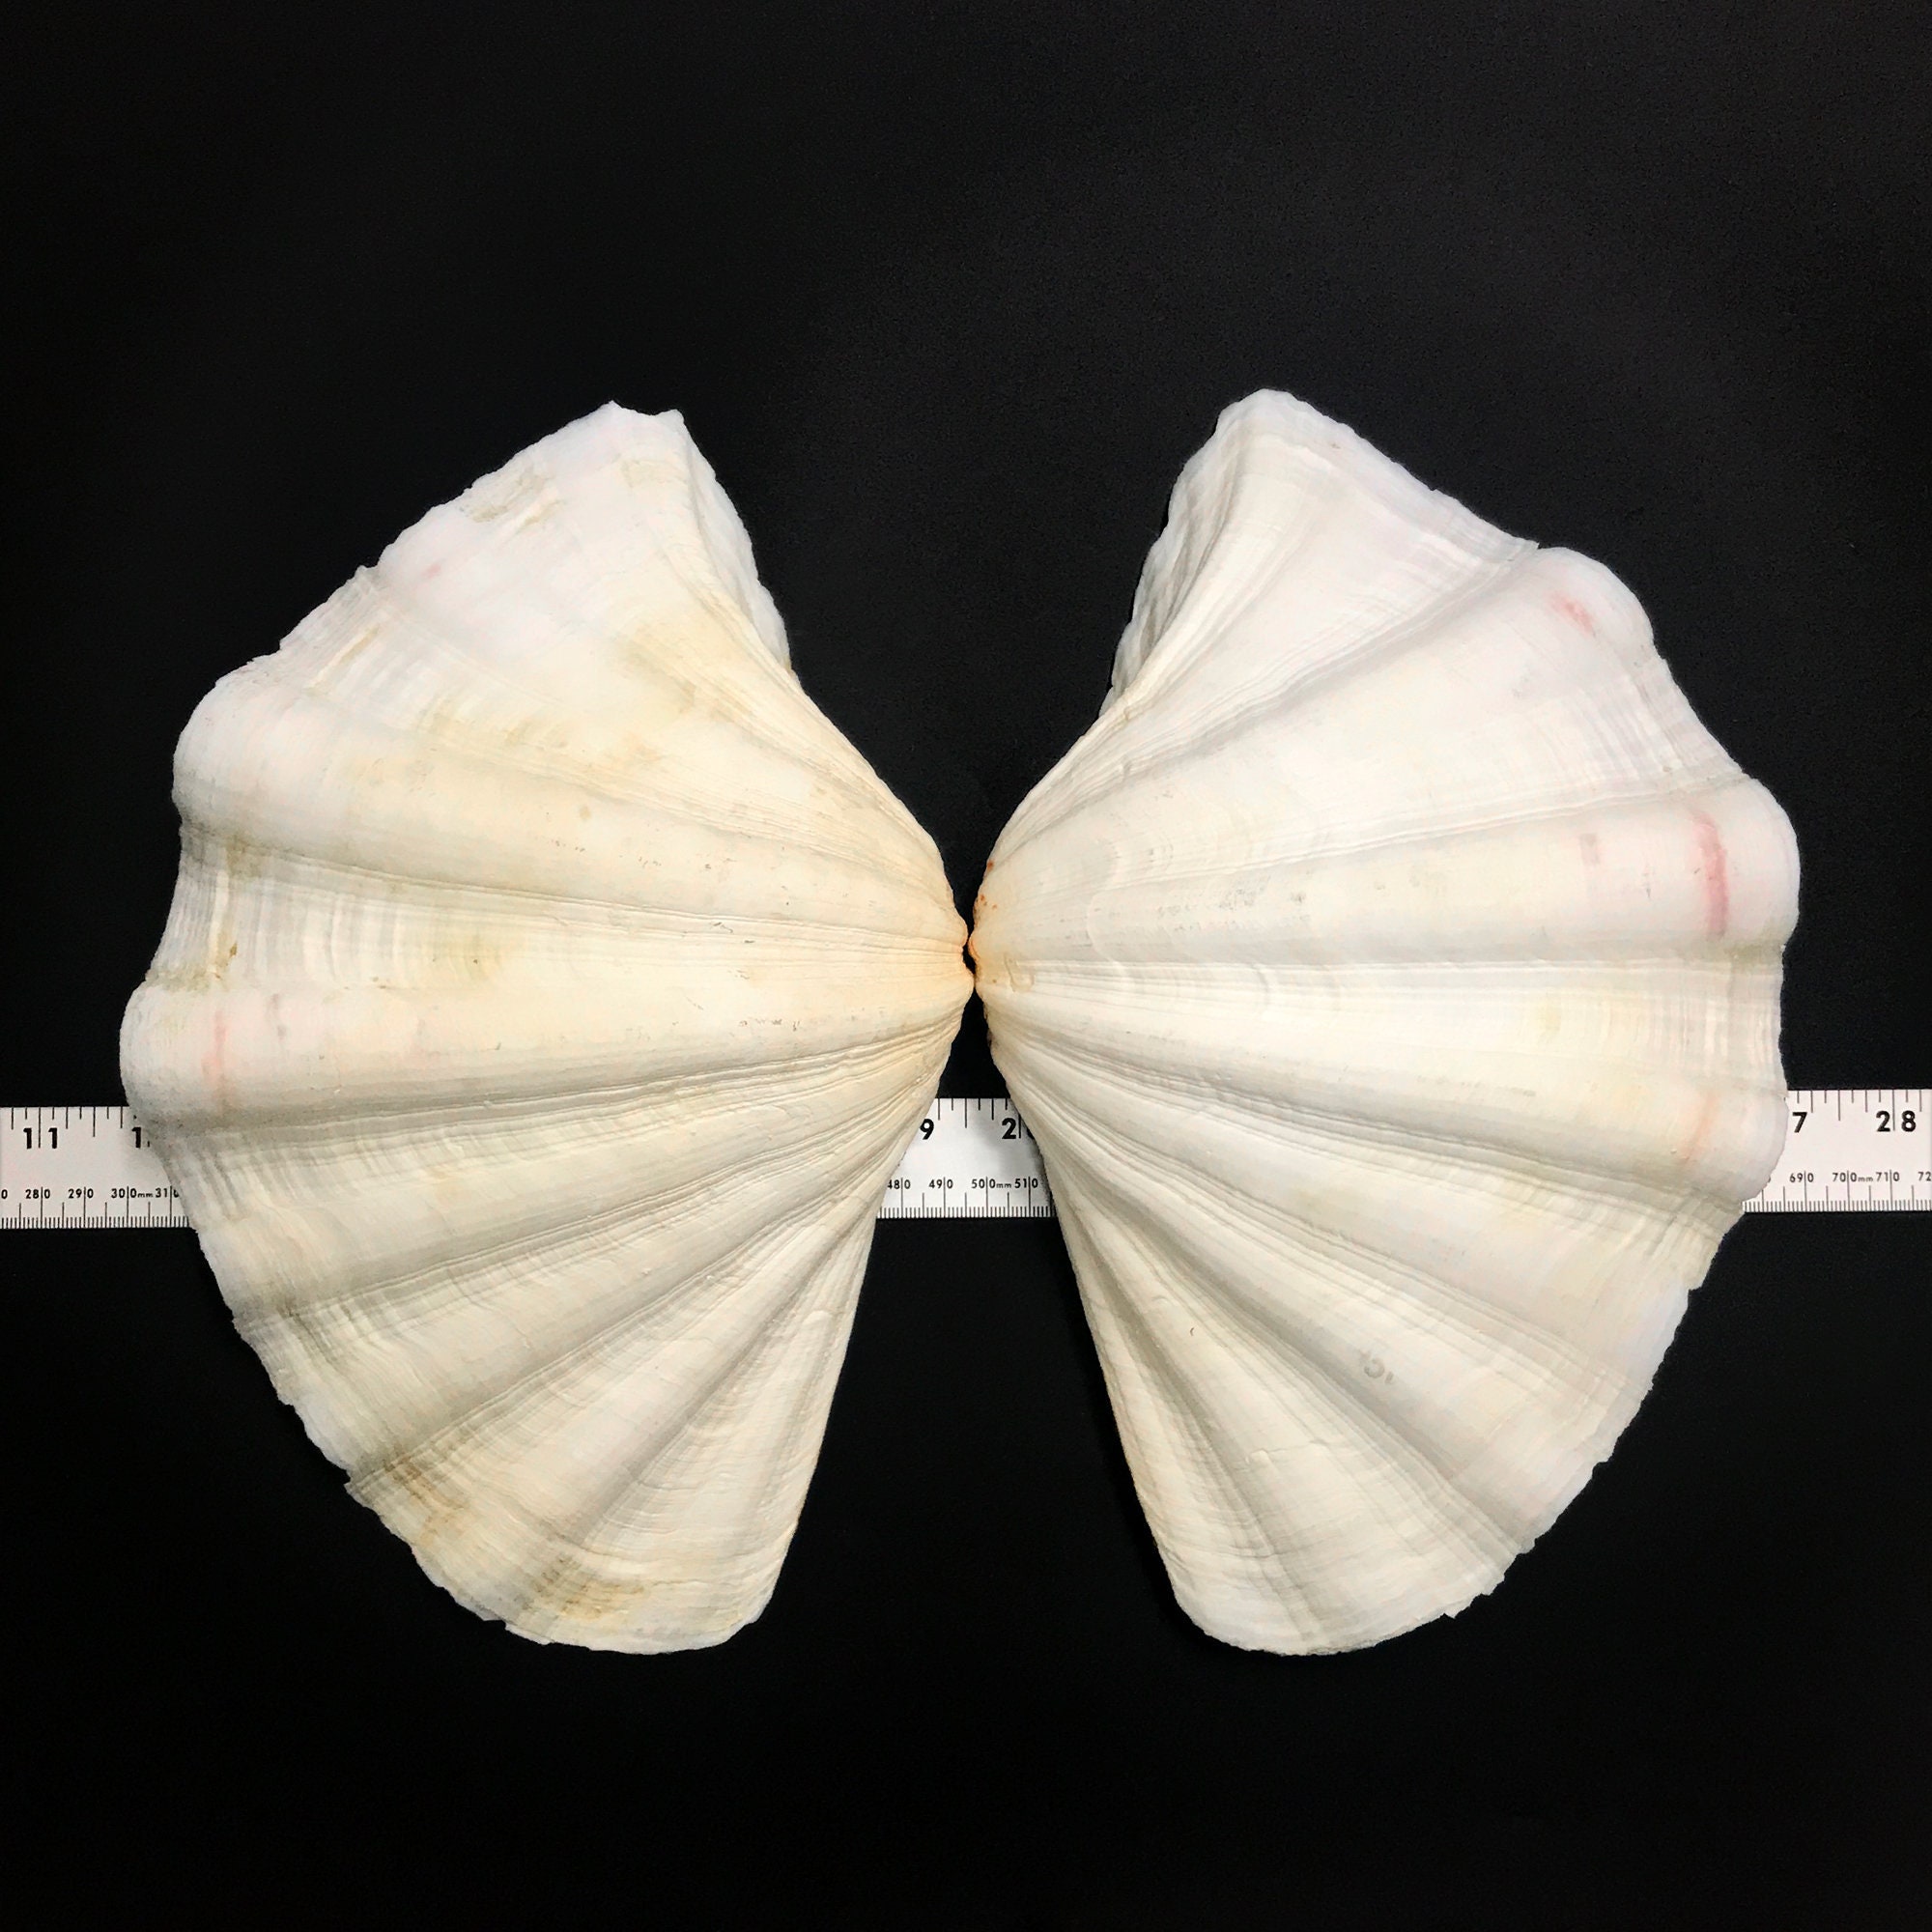 Extra Large Giant Clam Shell MATCHING PAIR Very Very Rare Unique Real  Complete Sea Shell Decorative Display Specimen Free USA Shipping 